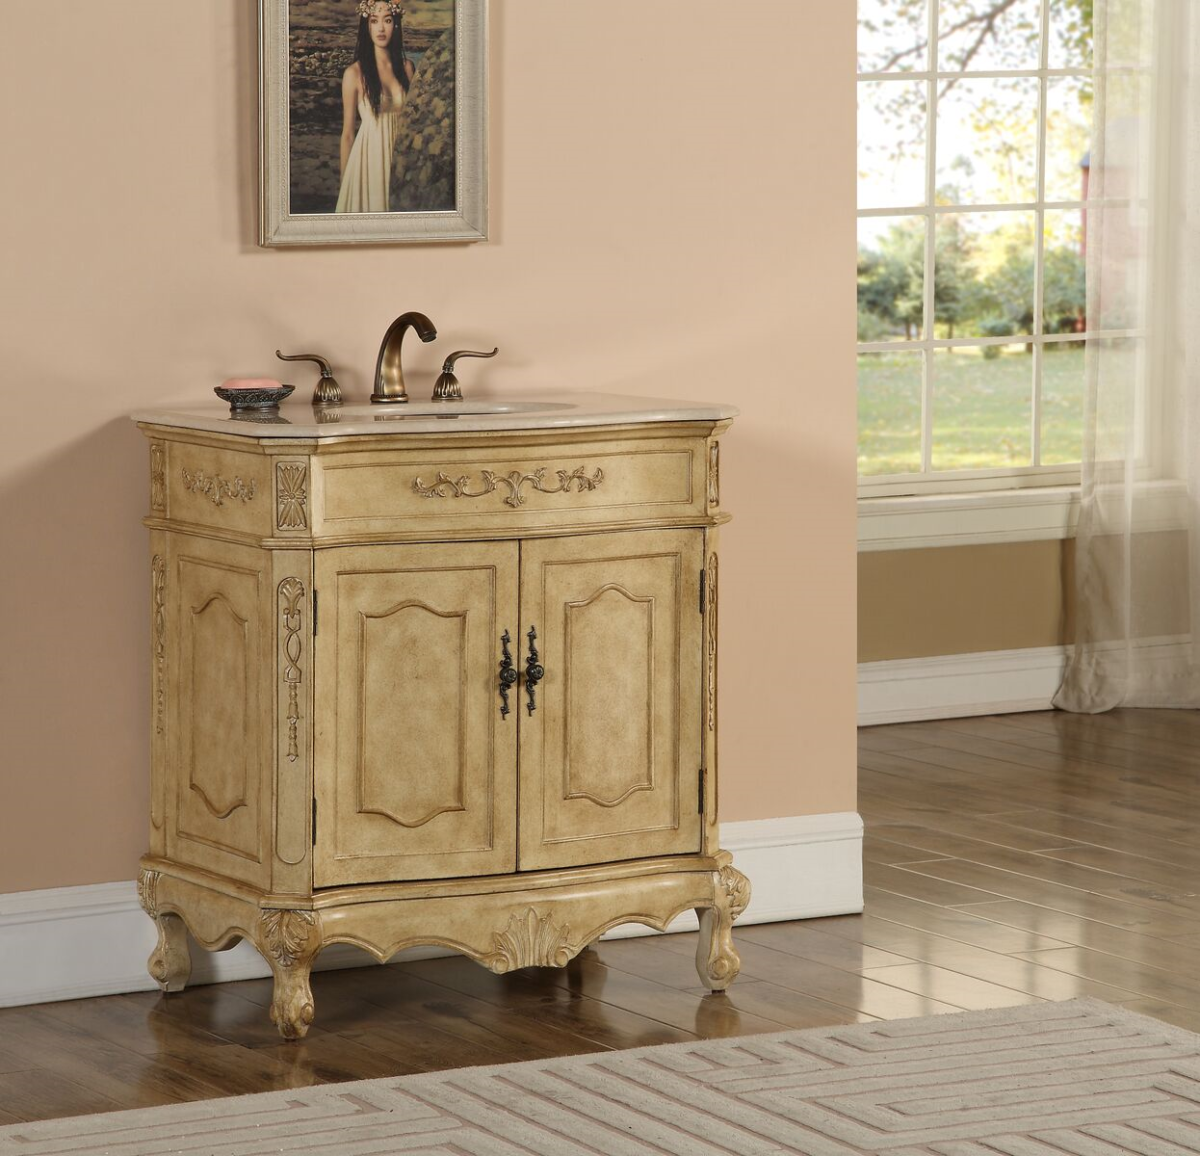 32" Antique Tan Finish Vanity with Mirror, Med Cab, and Linen Cabinet Options